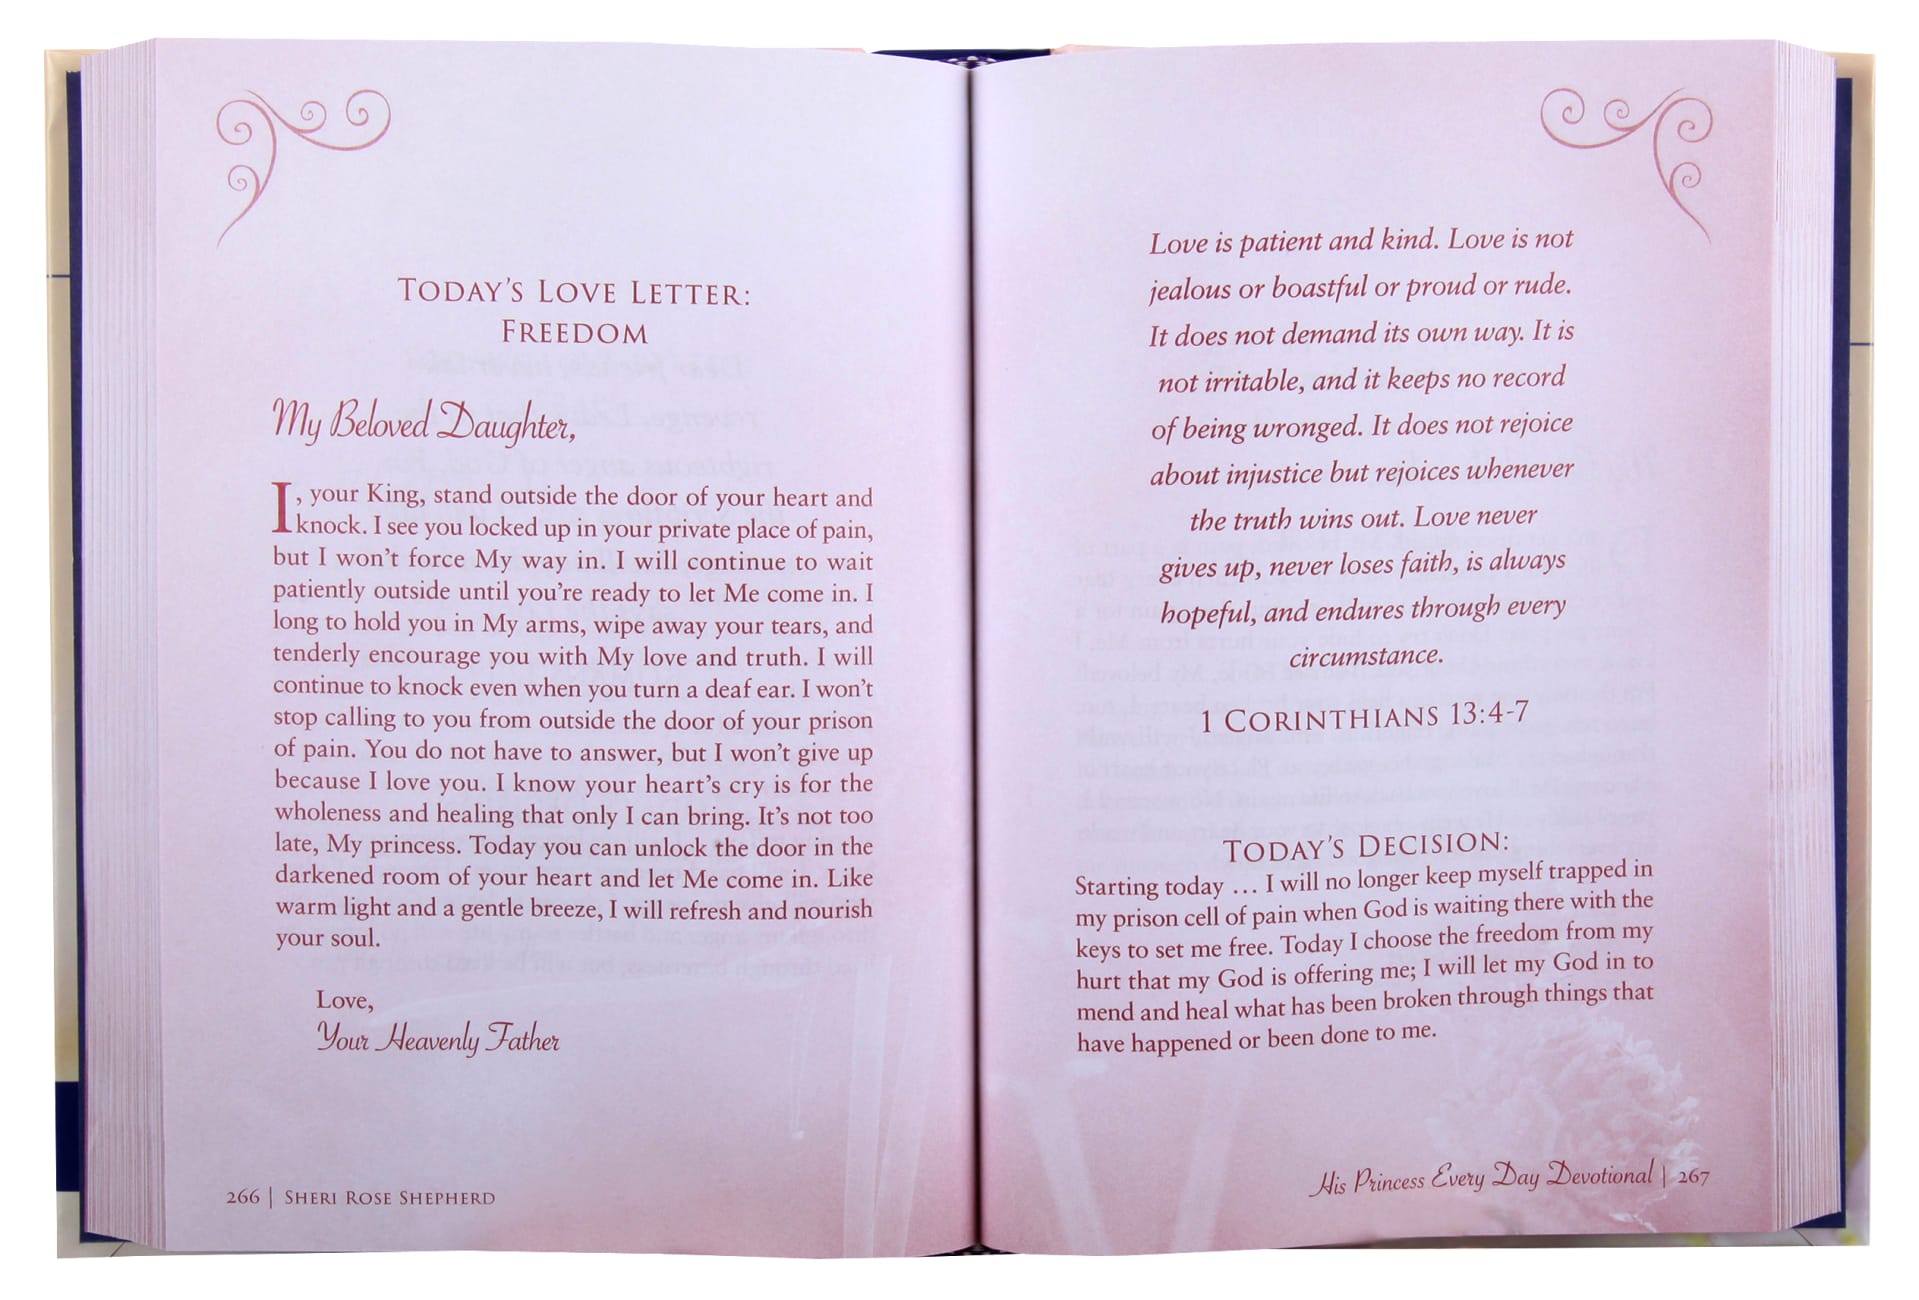 His Princess Every Day Devotional: Love Letters From Your King Hardback